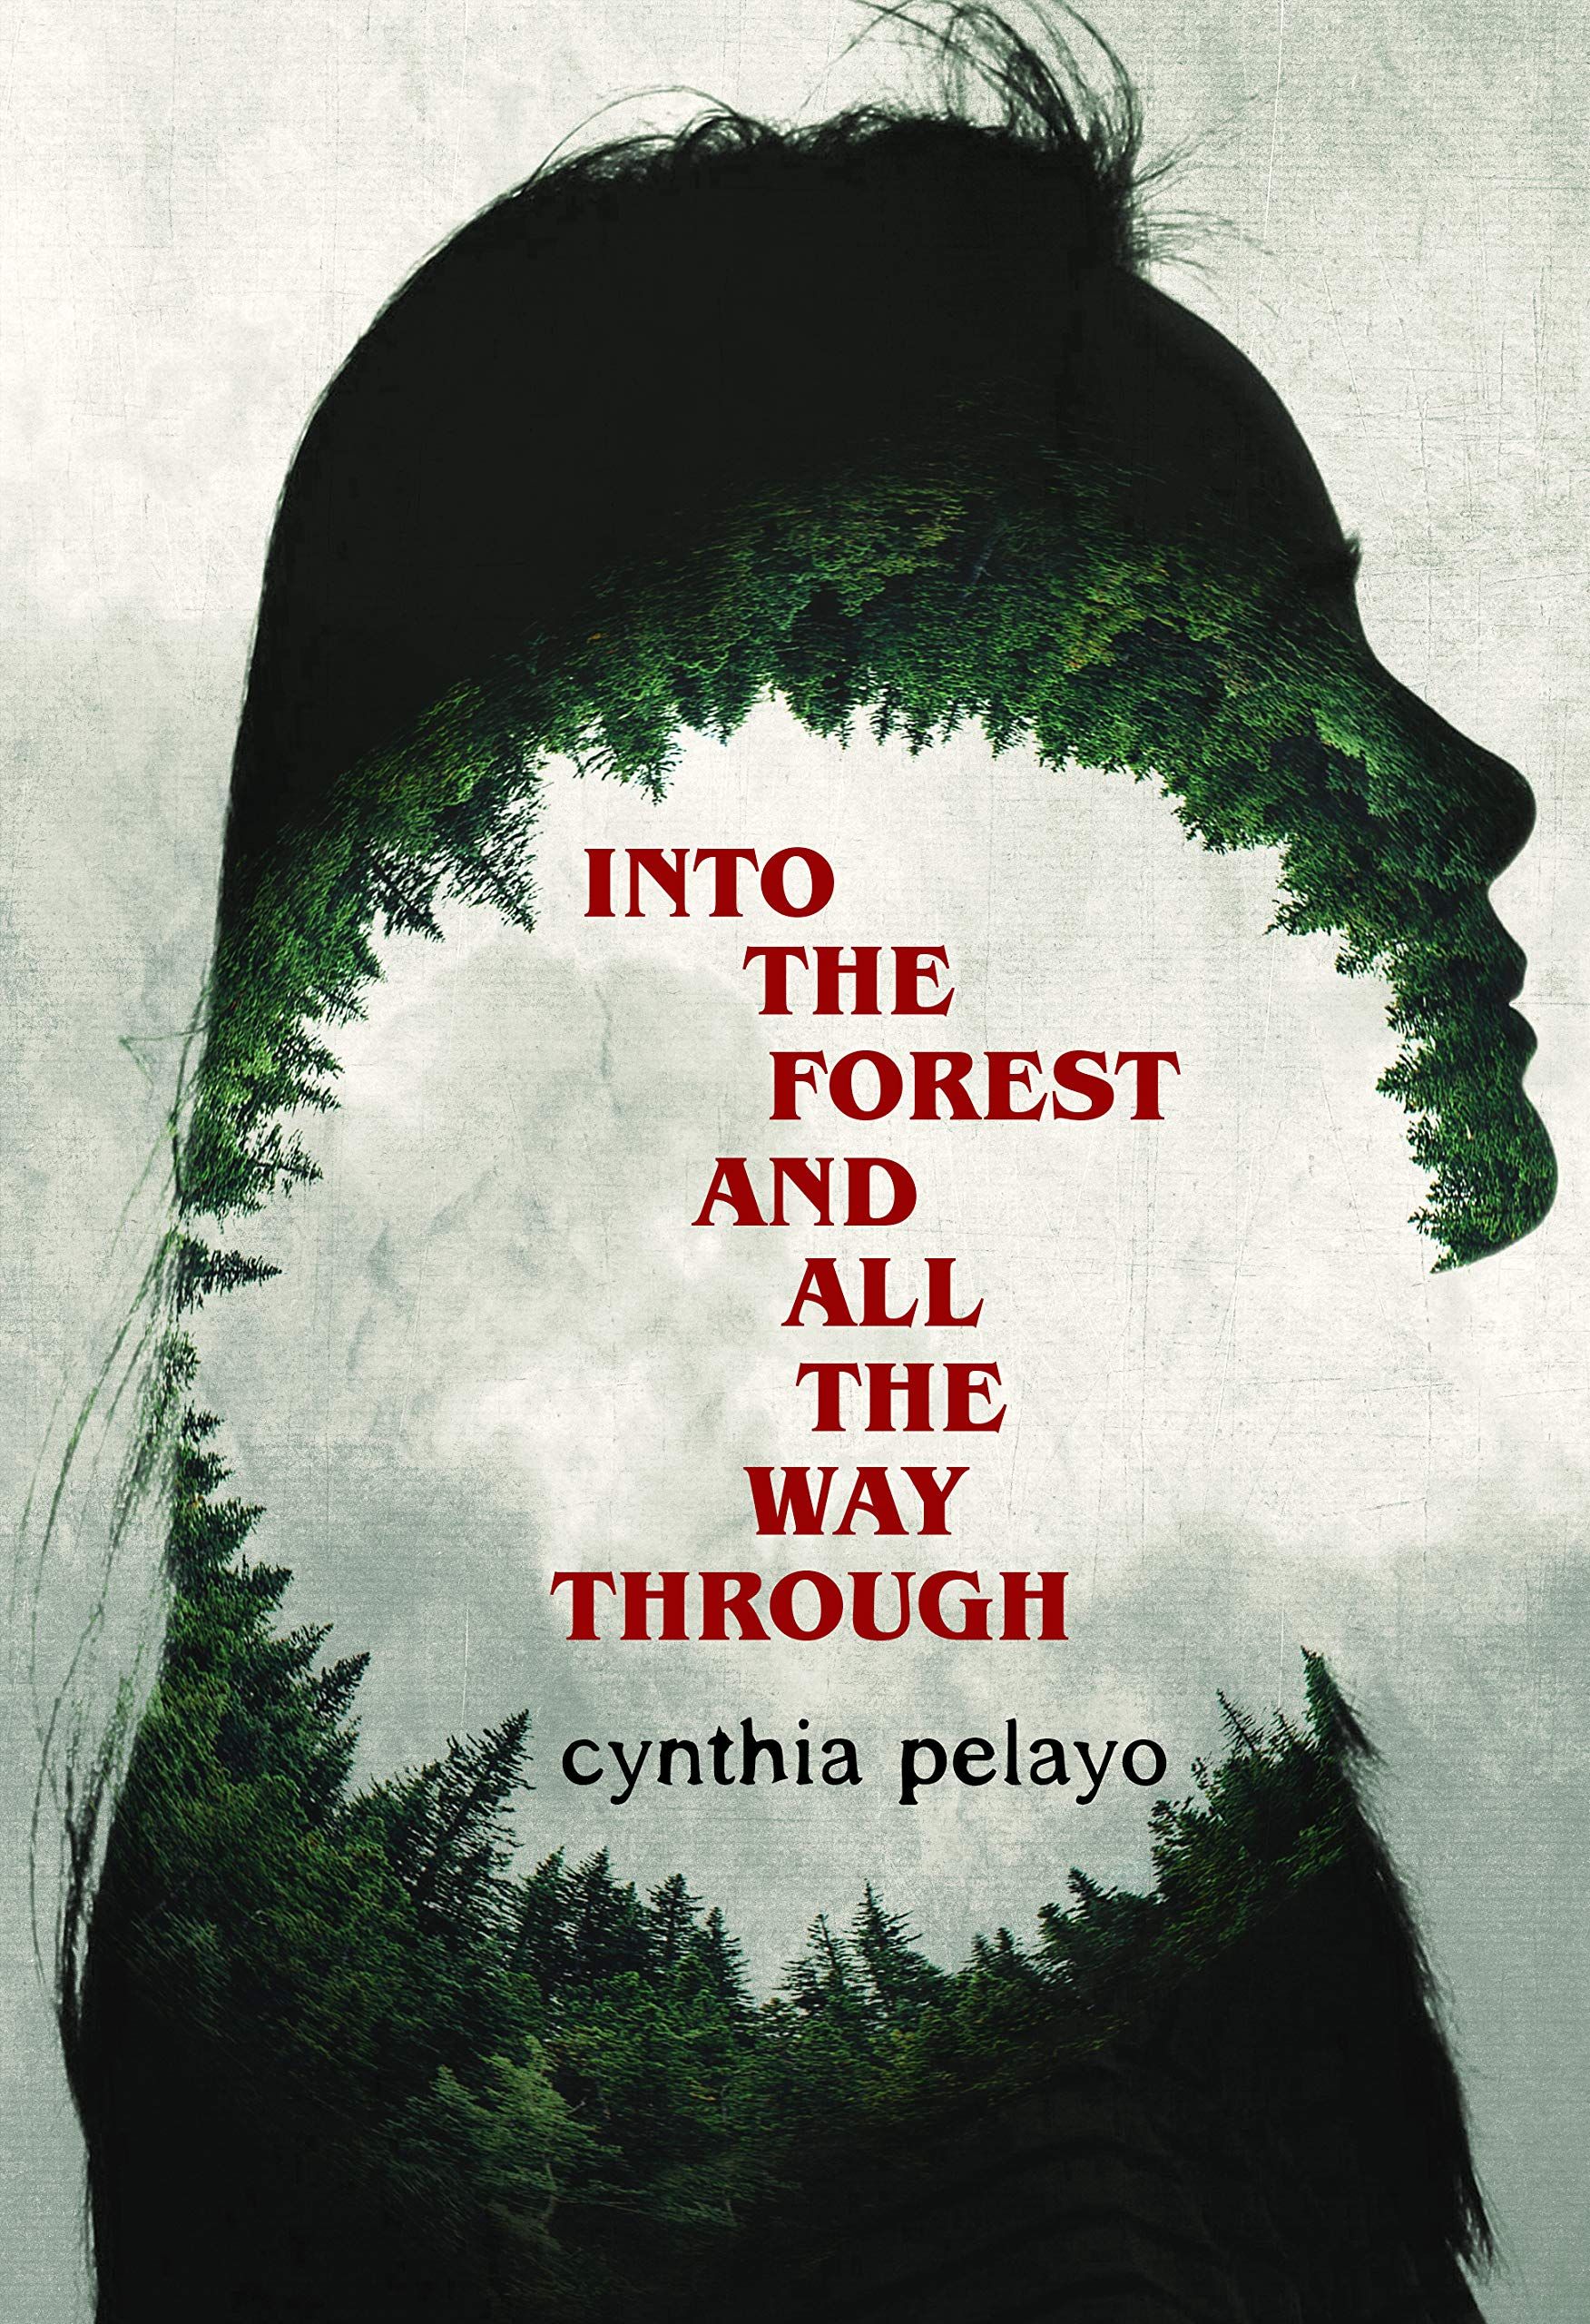 Cover of Into the Forest and All The Way Through by Cynthia Pelayo